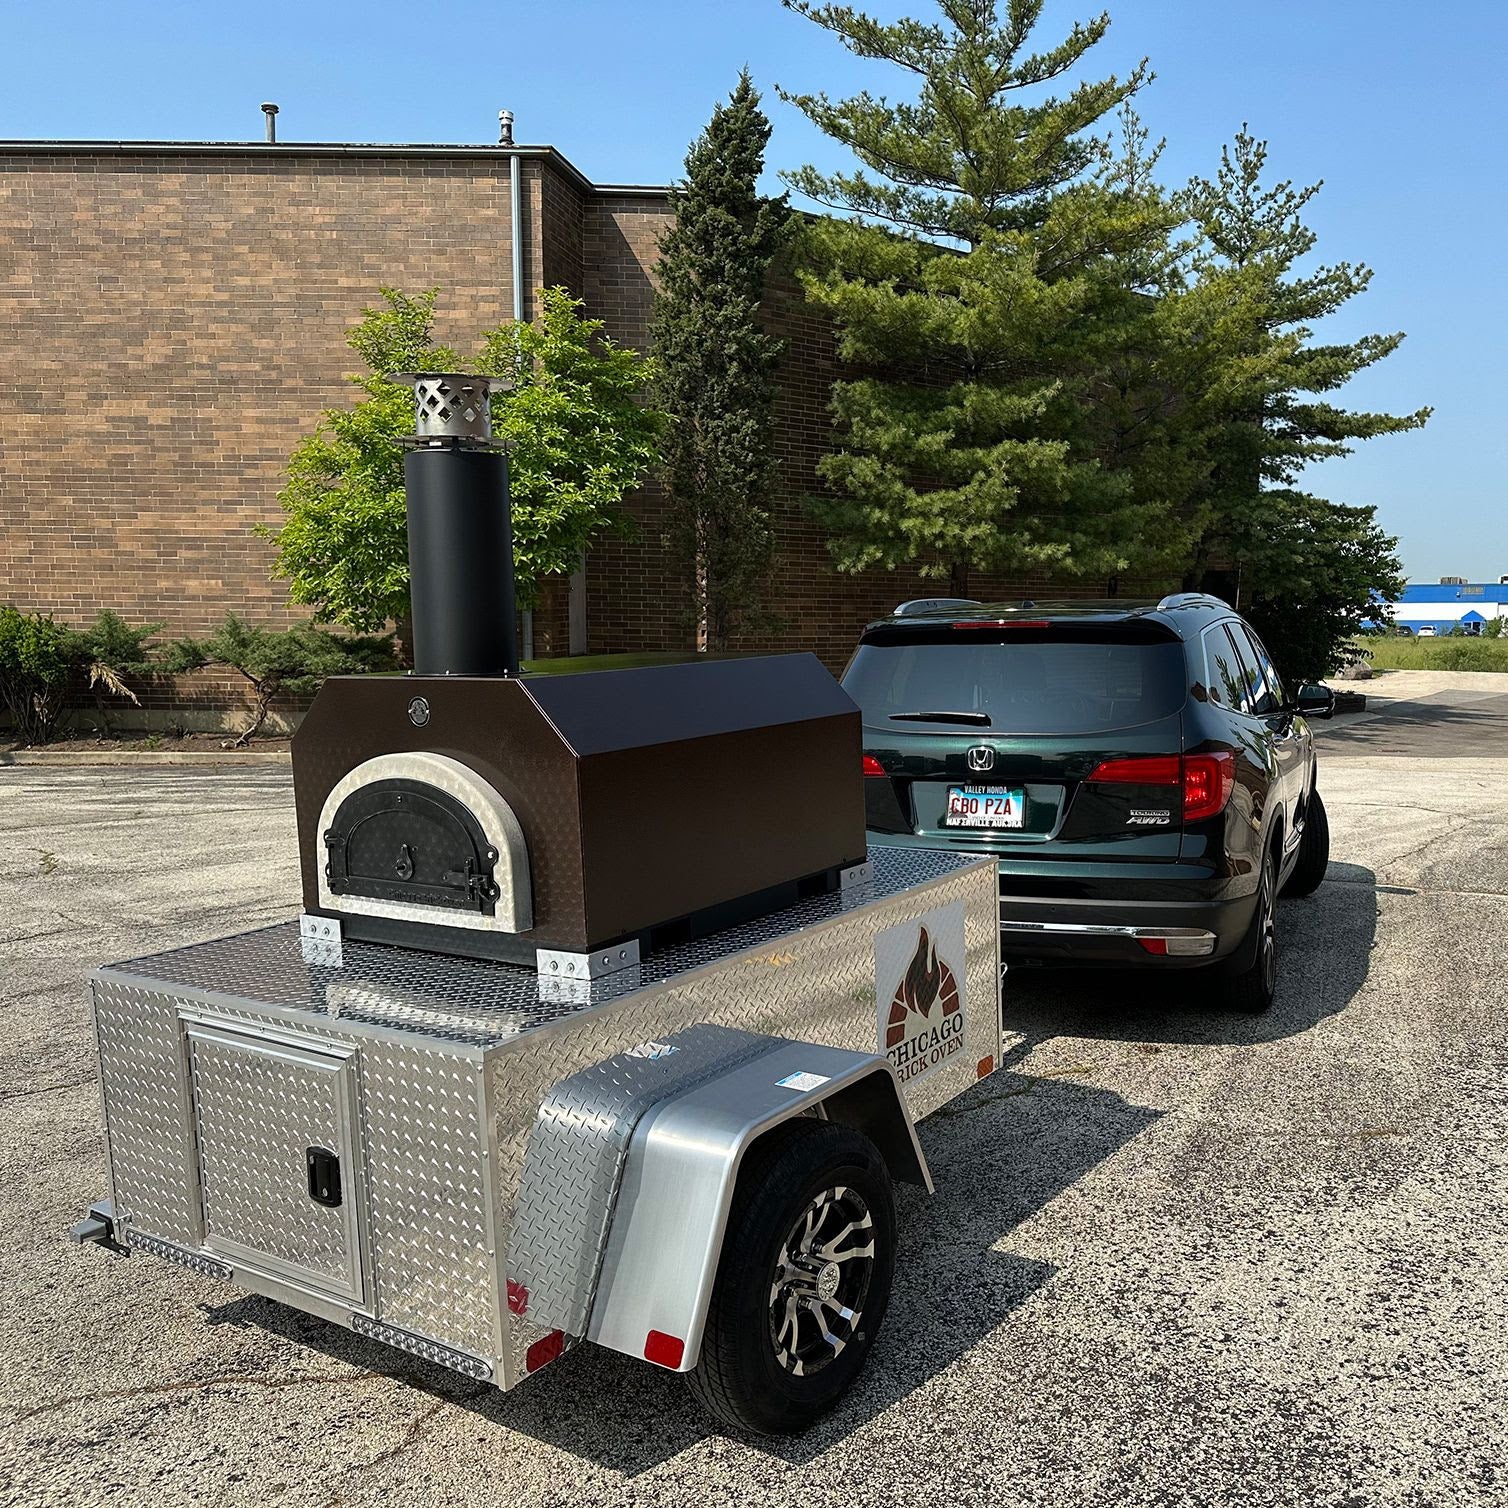 Chicago Brick Oven 750 Tailgater | Wood Fired Pizza Oven Trailer